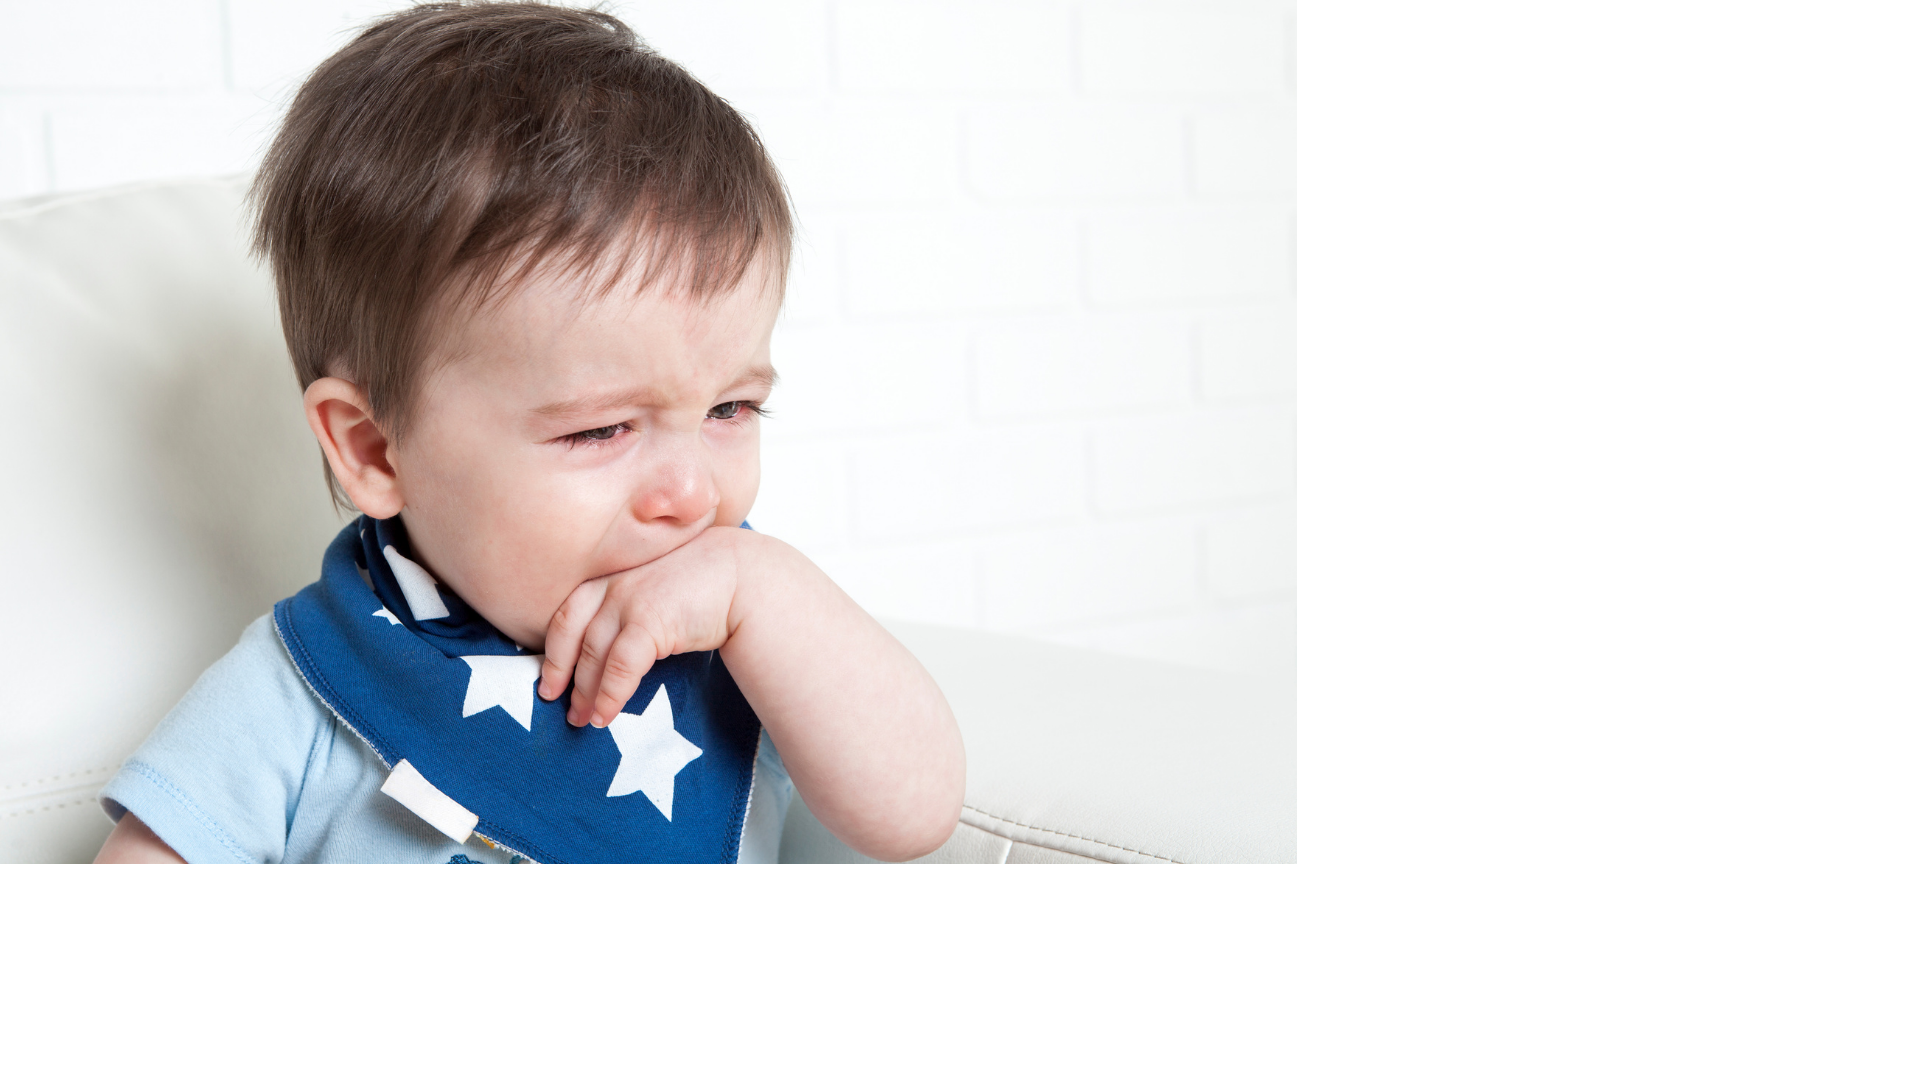 Babies tend to react to perceived distress in surrounding others with contagious crying.